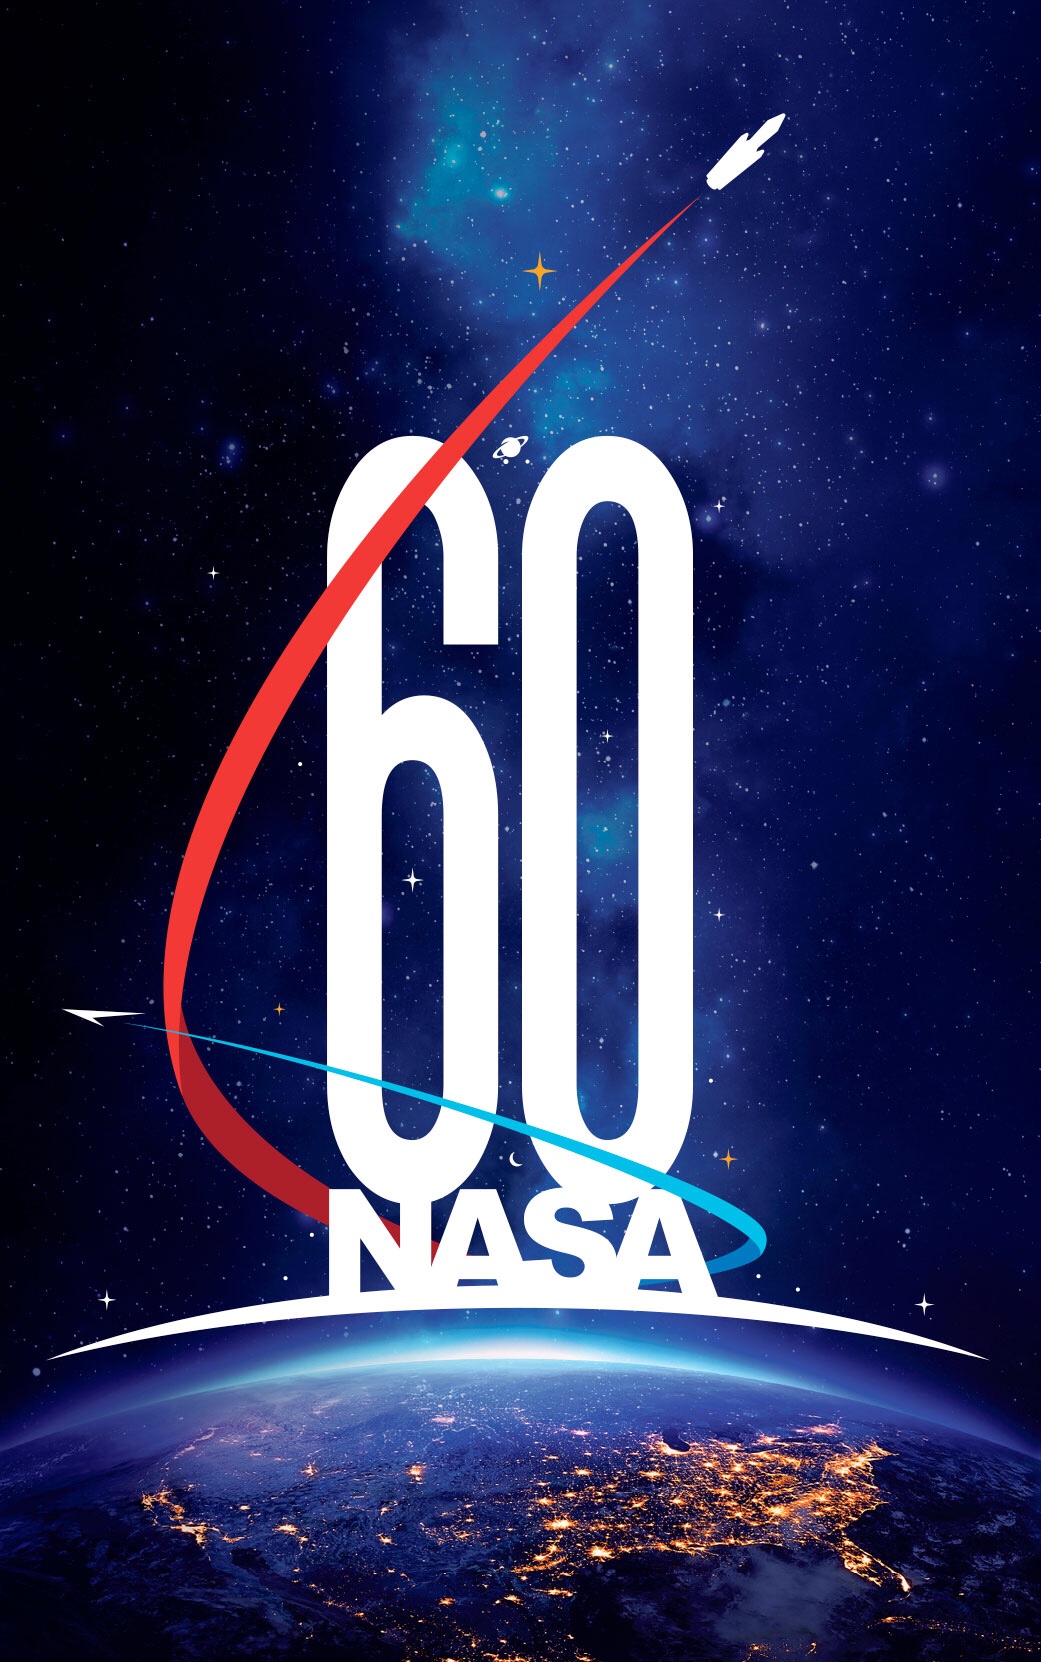 NASA's 60th anniversary logo, created by Matthew Skeins. The logo’s arrangement is intended to evoke a quote attributed to 17th century physicist Isaac Newton: "If I have seen further than others, it is by standing on the shoulders of giants." (NASA)